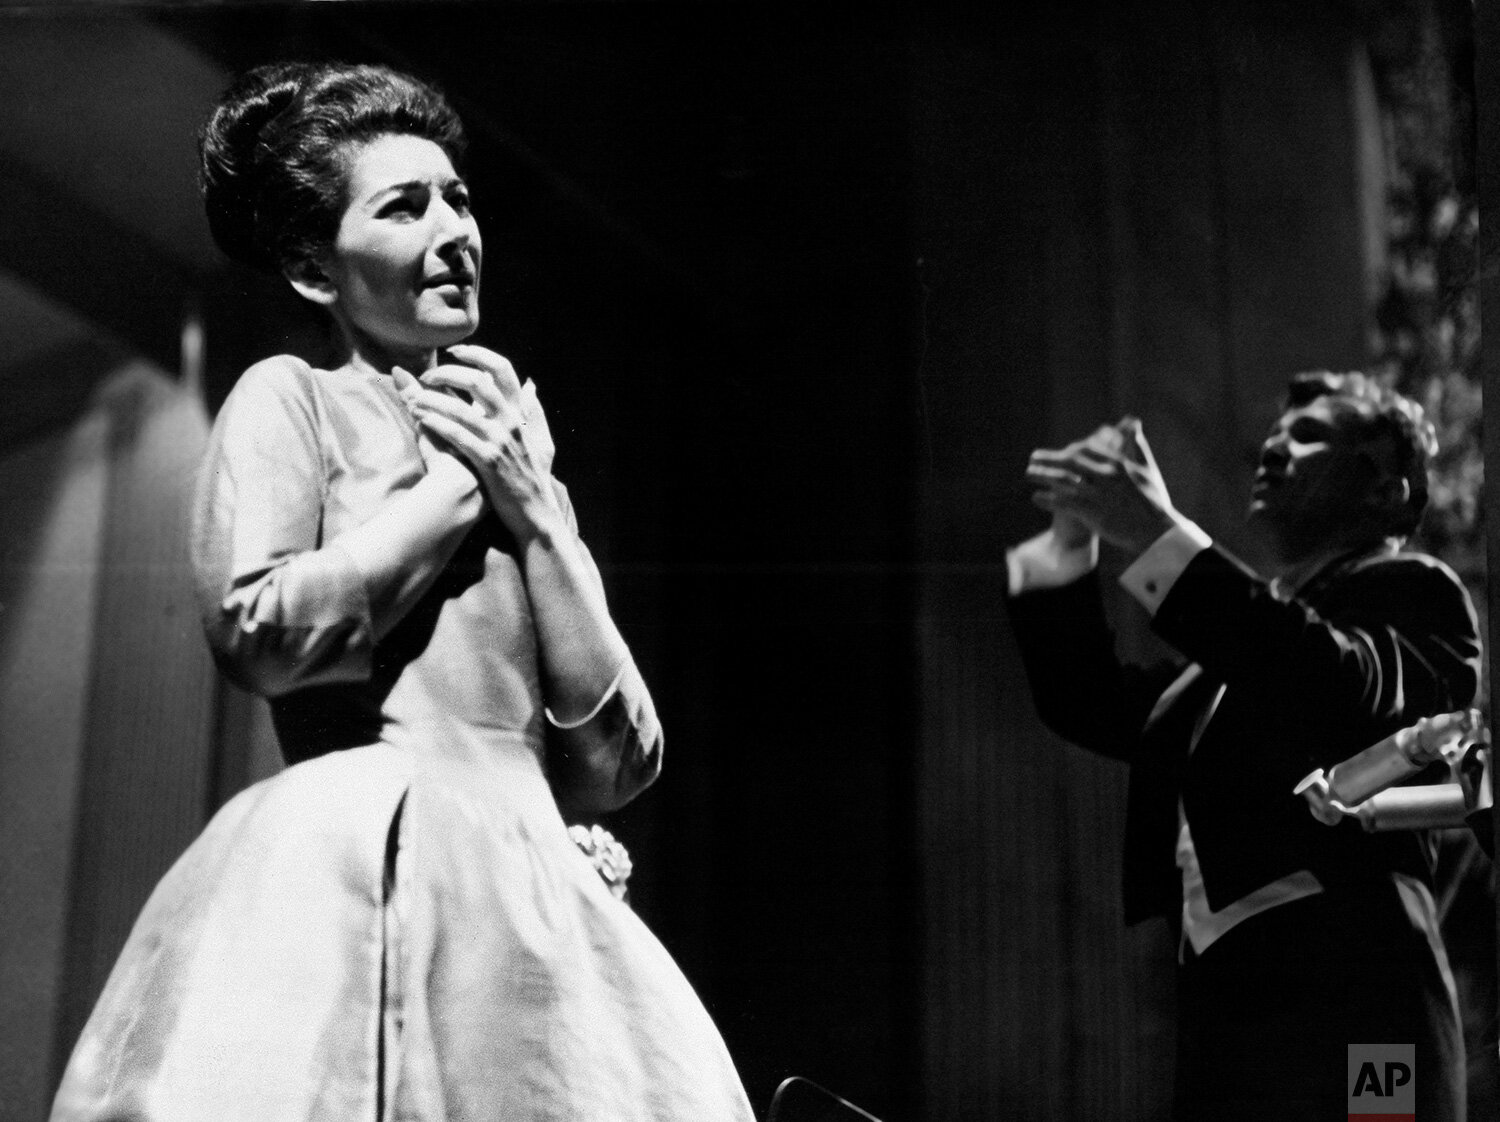  Soprano Maria Callas sings at the Theatre de Champs-Elysees under the direction of Maestro Georges Pretre, on June 5, 1963 in Paris, France. (AP Photo/Jean-Jacques Levy) 